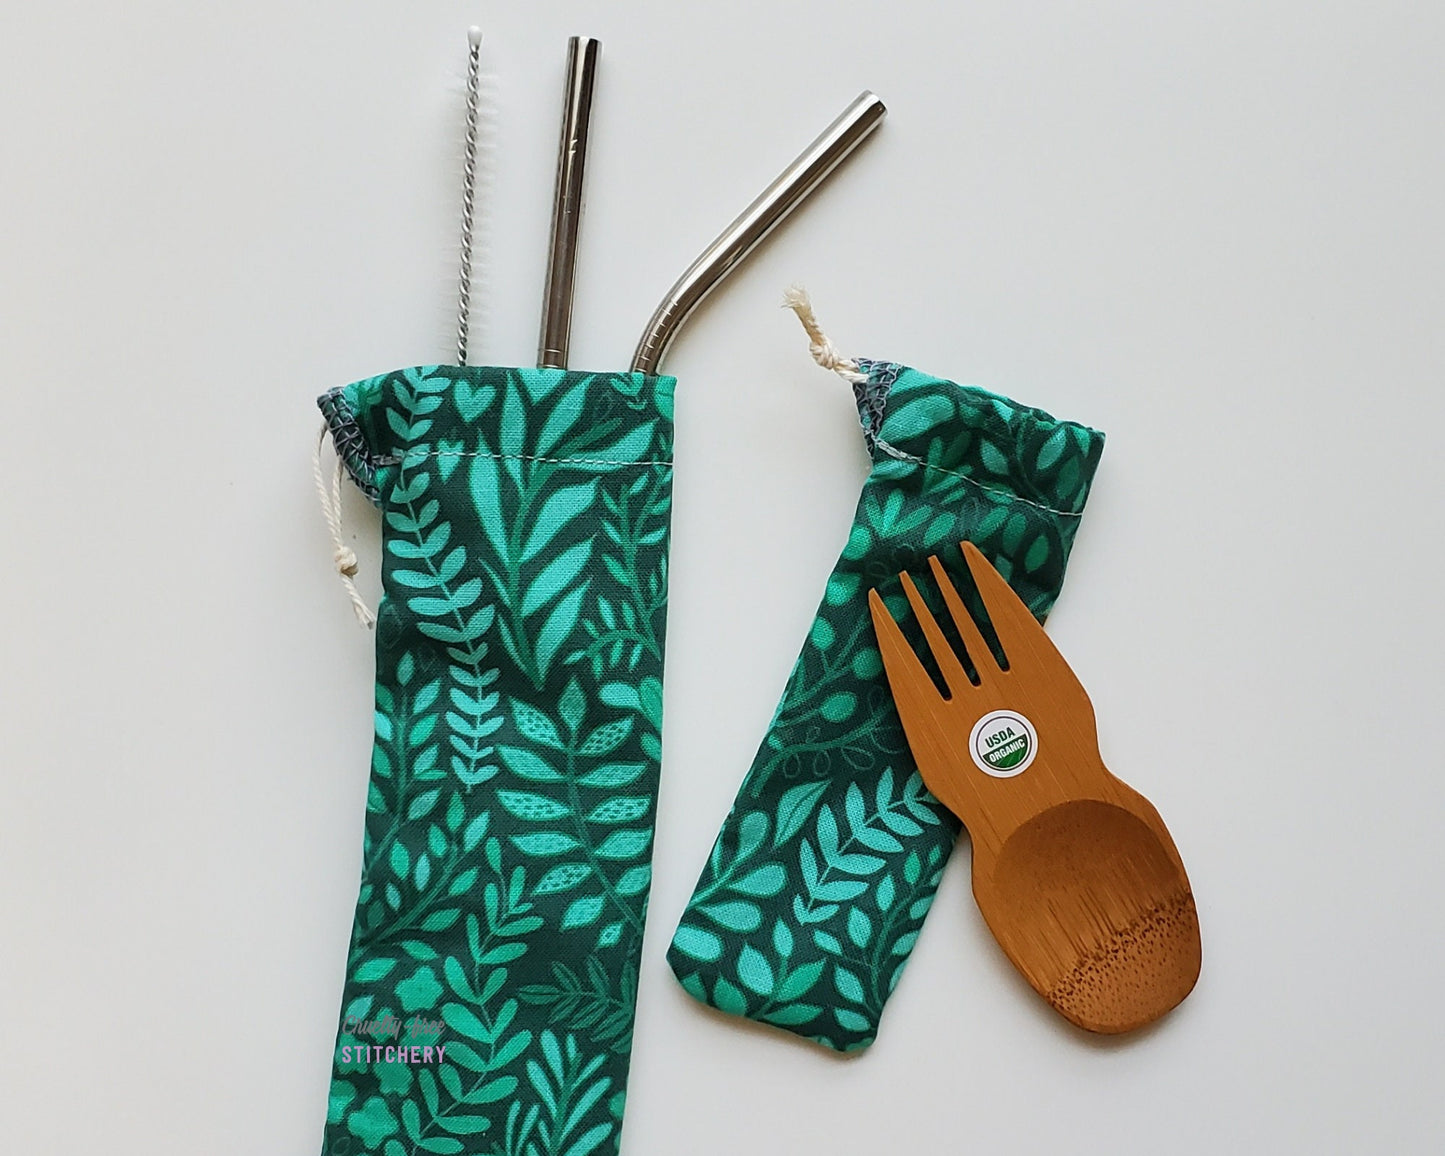 Reusable bamboo spork and straw pouch set. The pouches are both a dark green with lighter green leaves and vines.